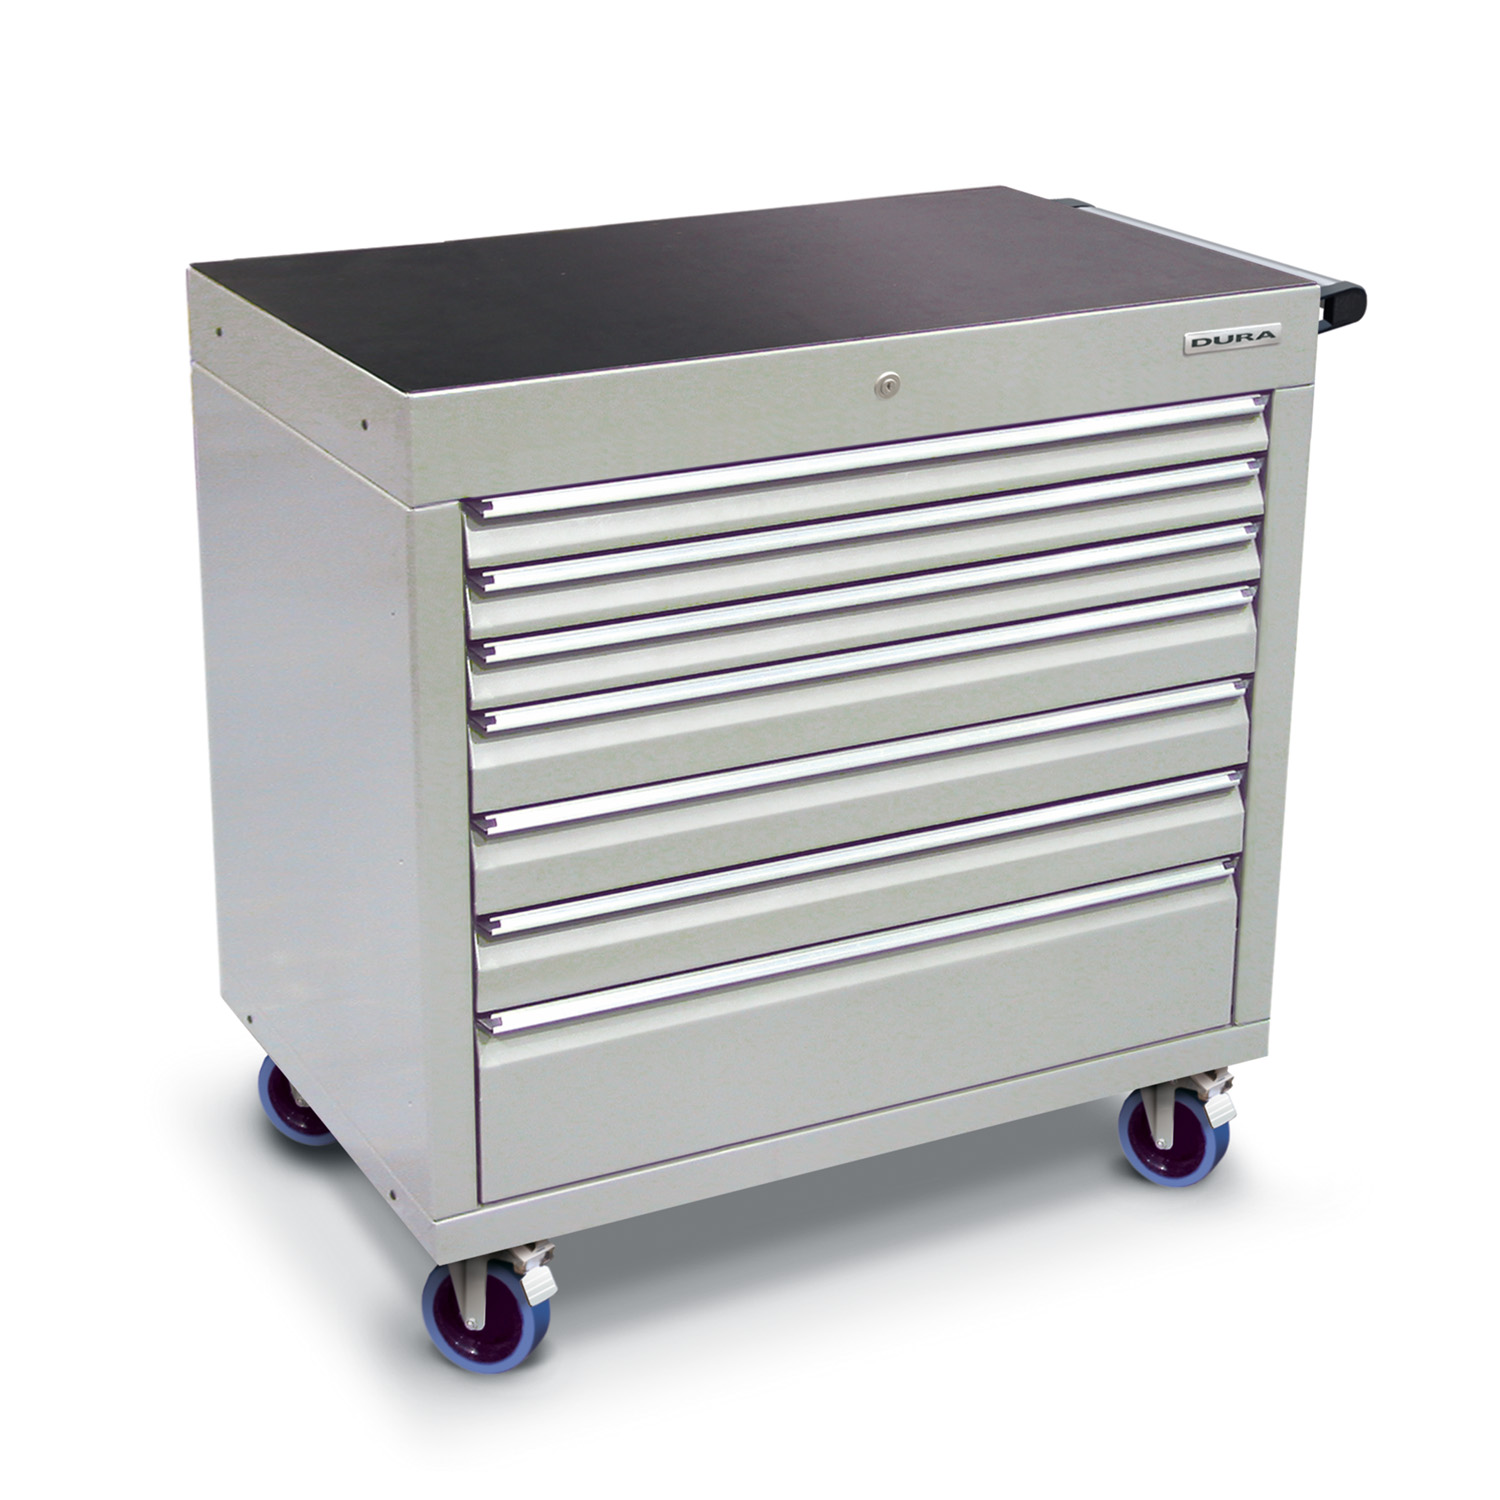 900 series cabinet with 7 drawers (3 slim, 3 medium, 1 large) and castors